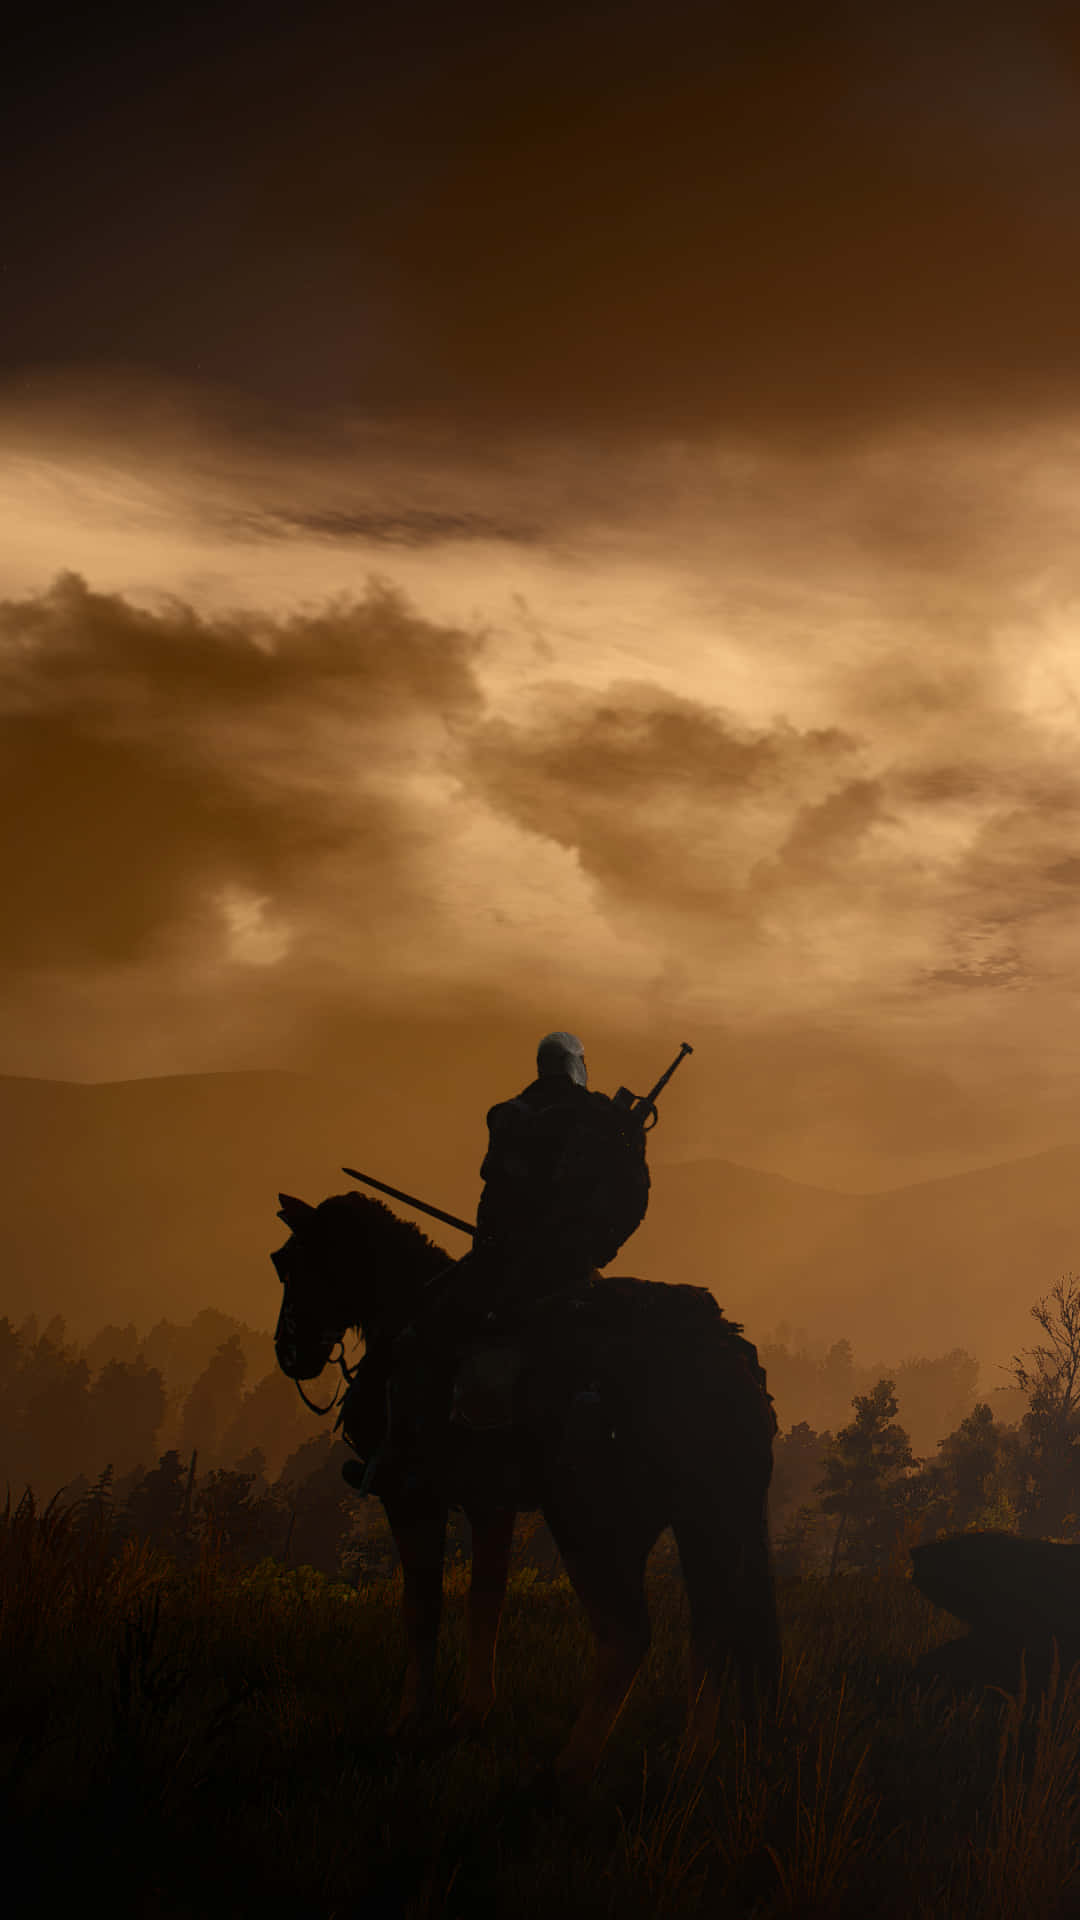 Man Riding Horse Silhouette Witcher 3 Phone Wallpaper